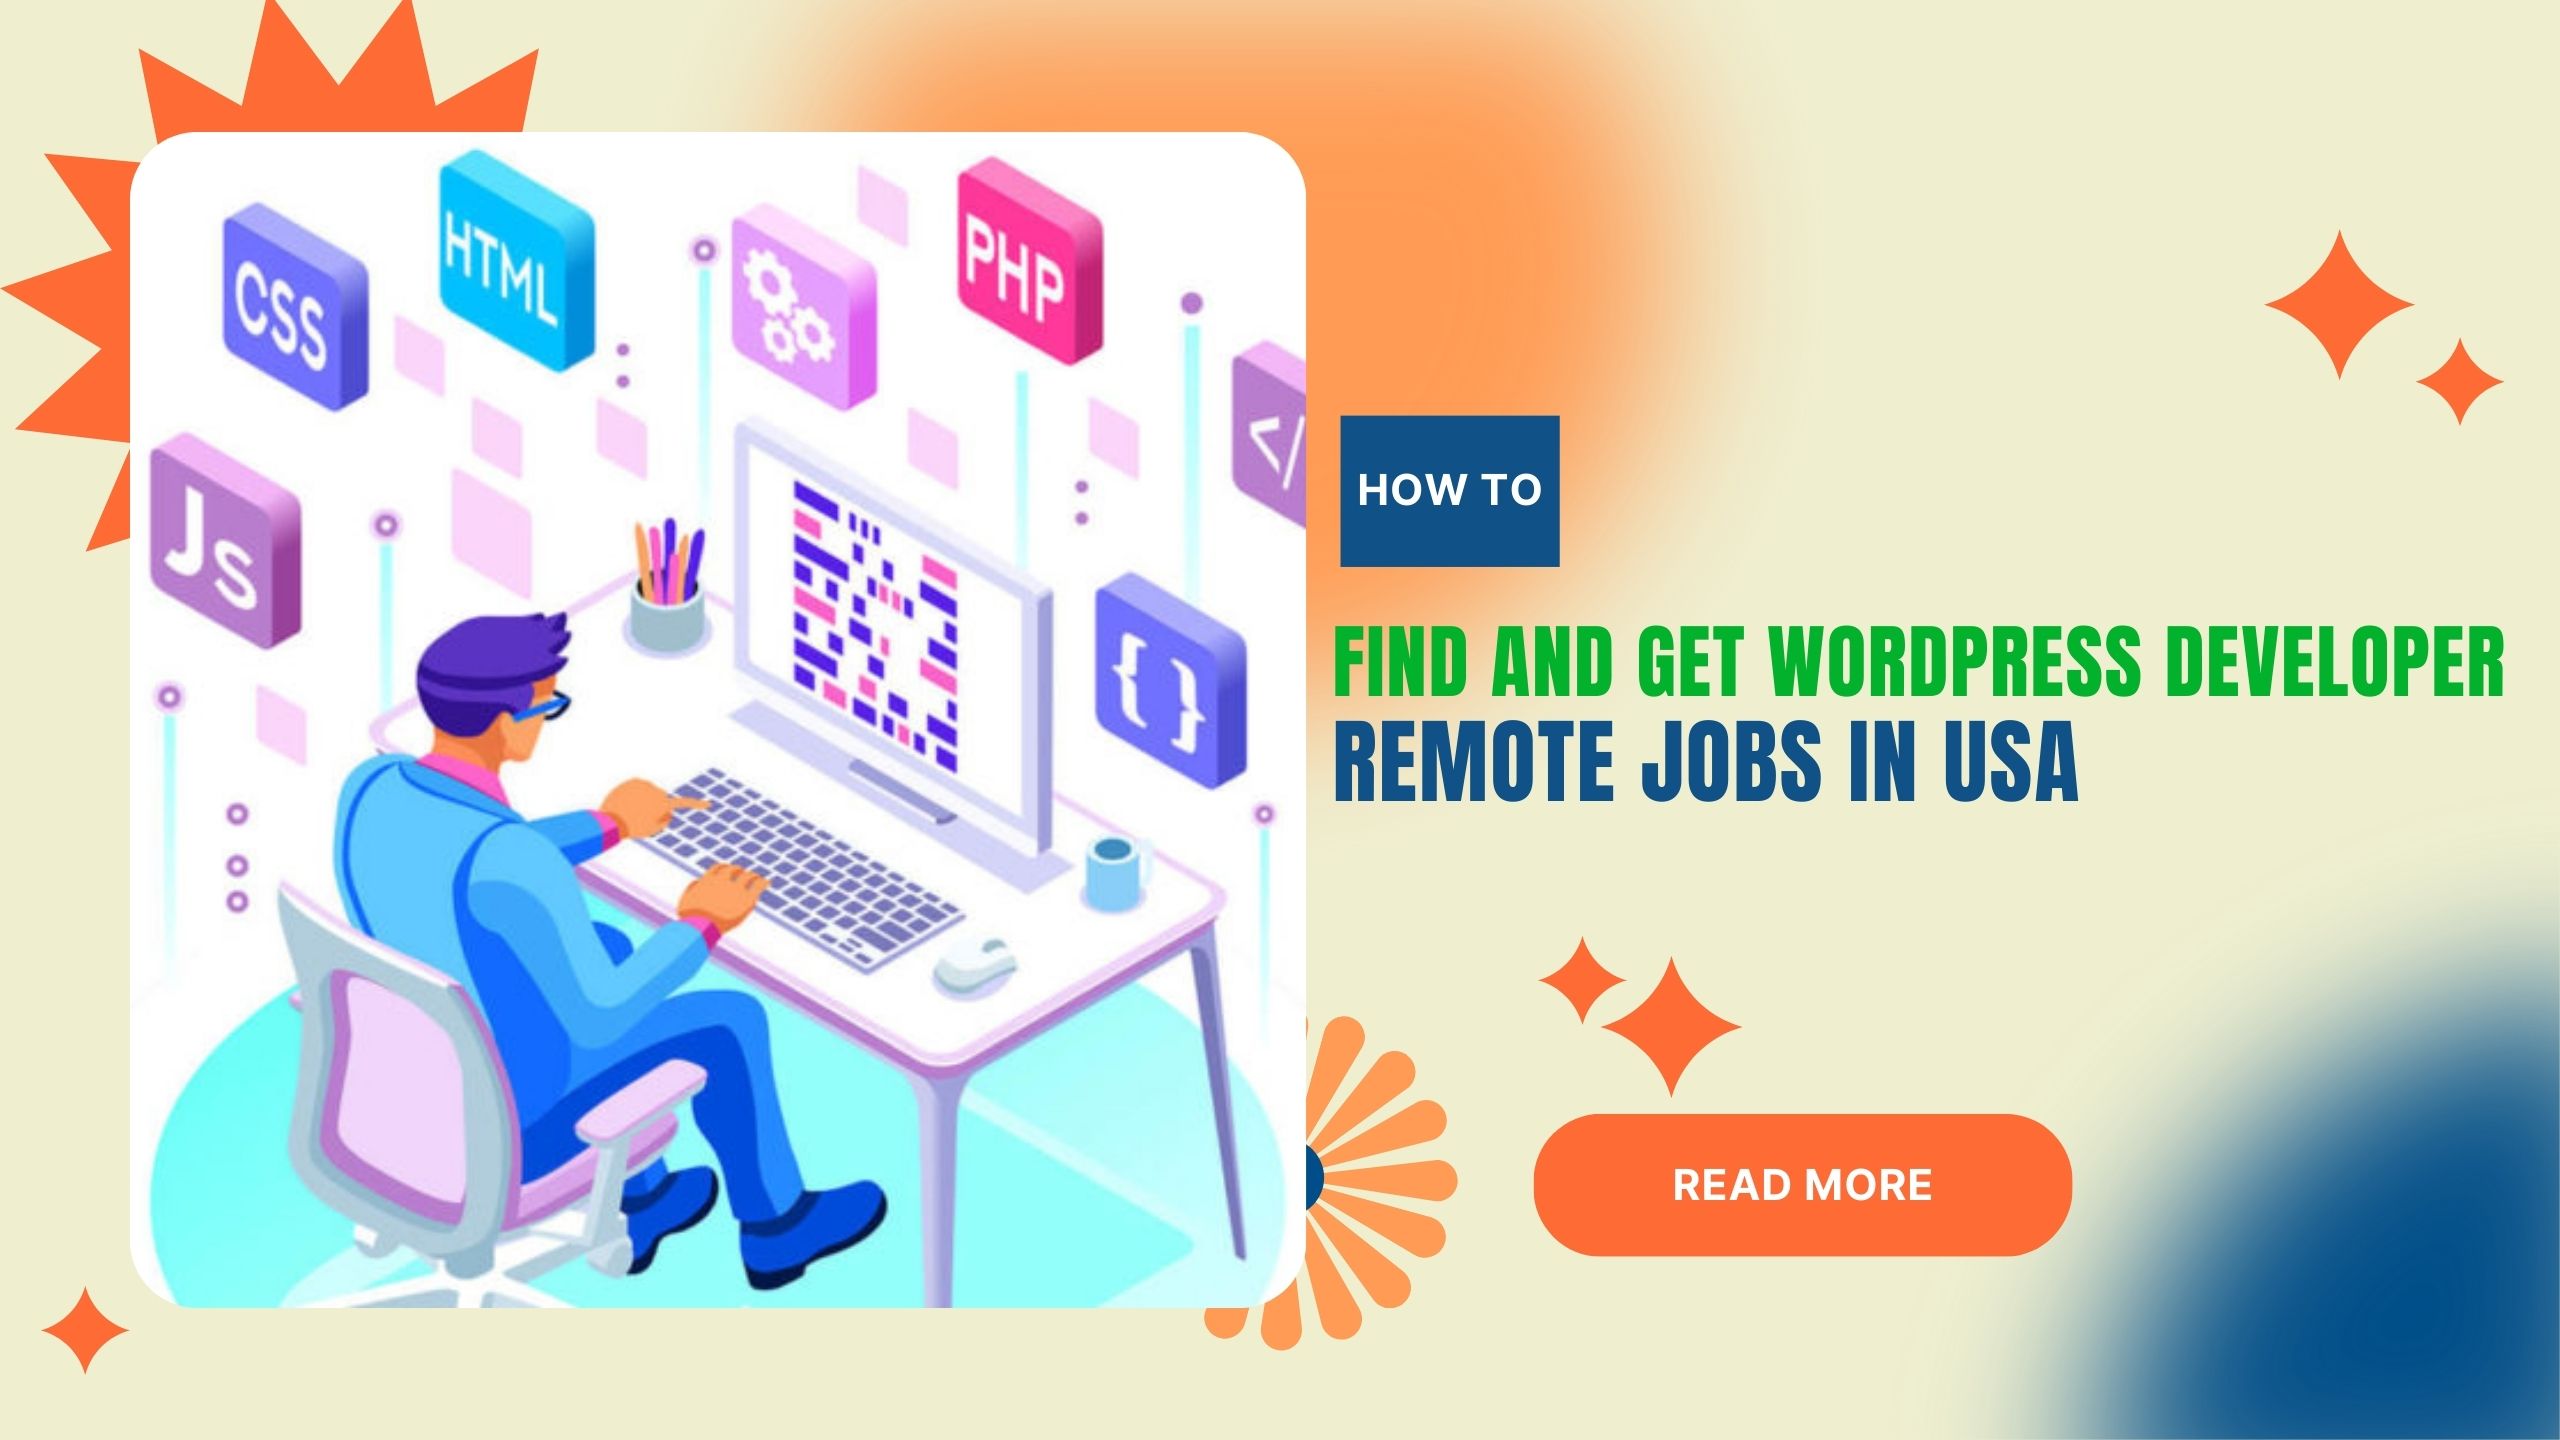 How to Find and Get WordPress Developer Remote Jobs in USA